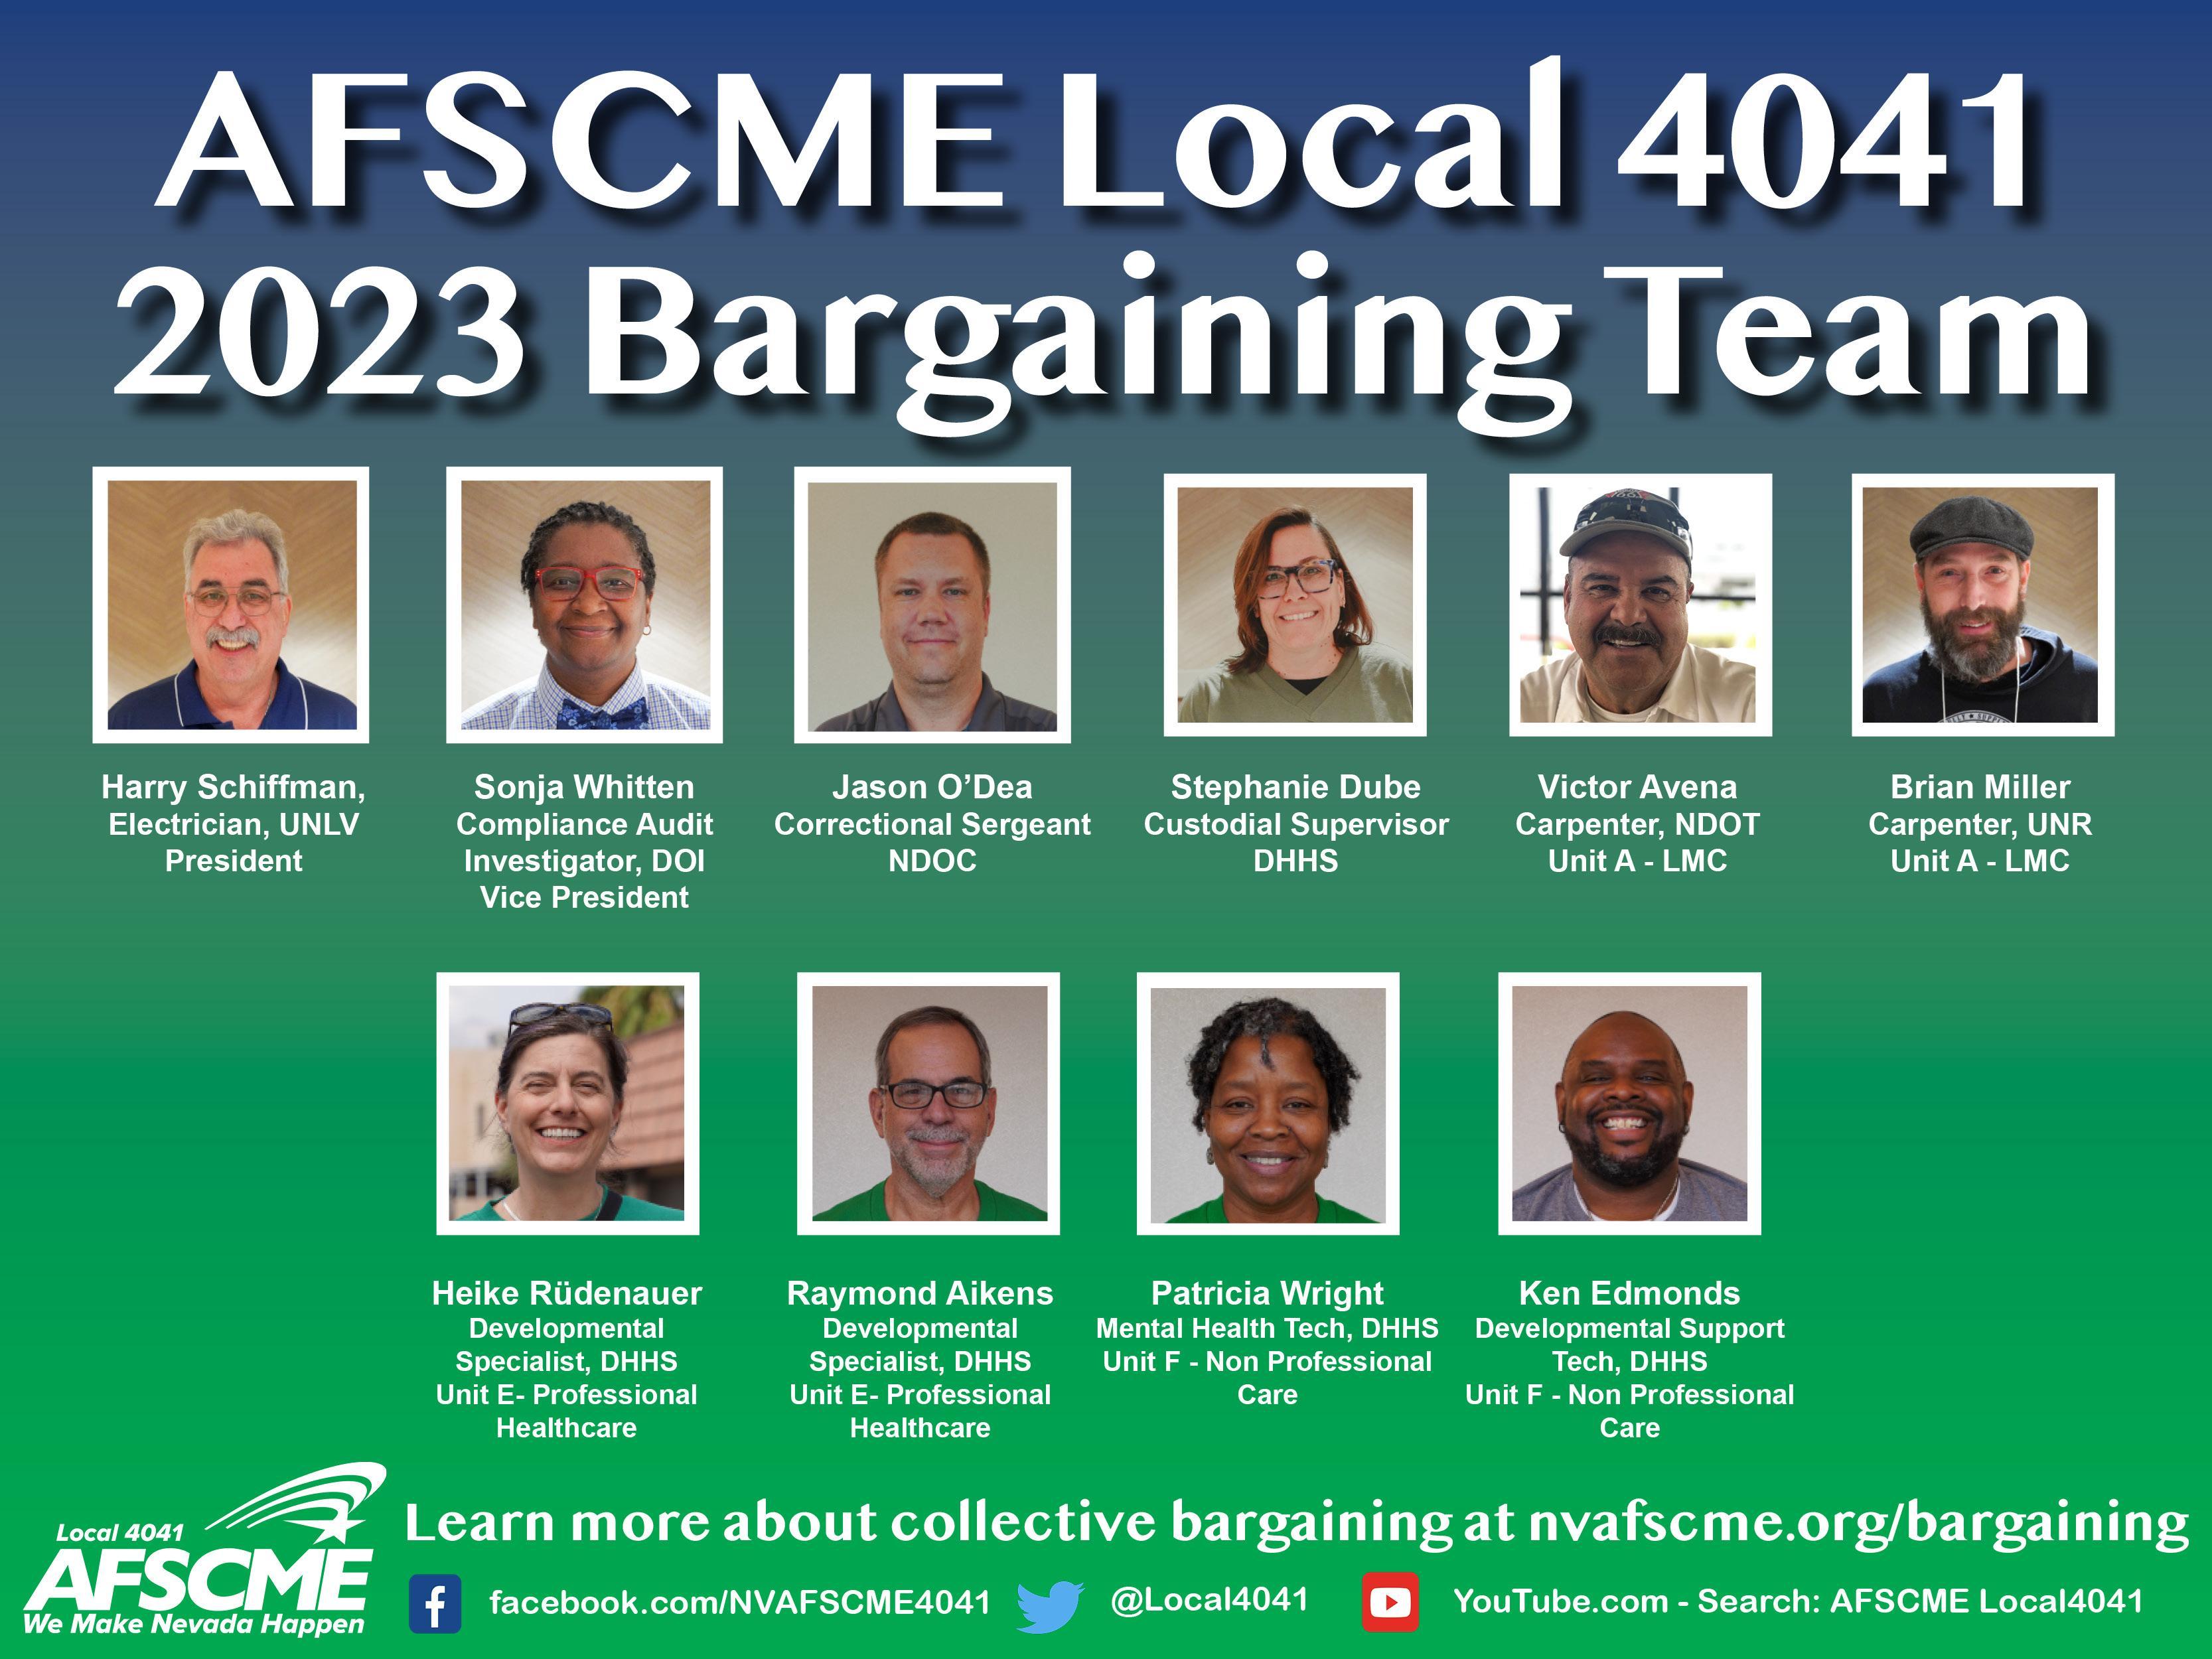 AFSCME Local 4041 Bargaining Team 2023, AFSCME Tentative Agreement, AFSCME TA, AFSCME Contract, Nevada state employees union